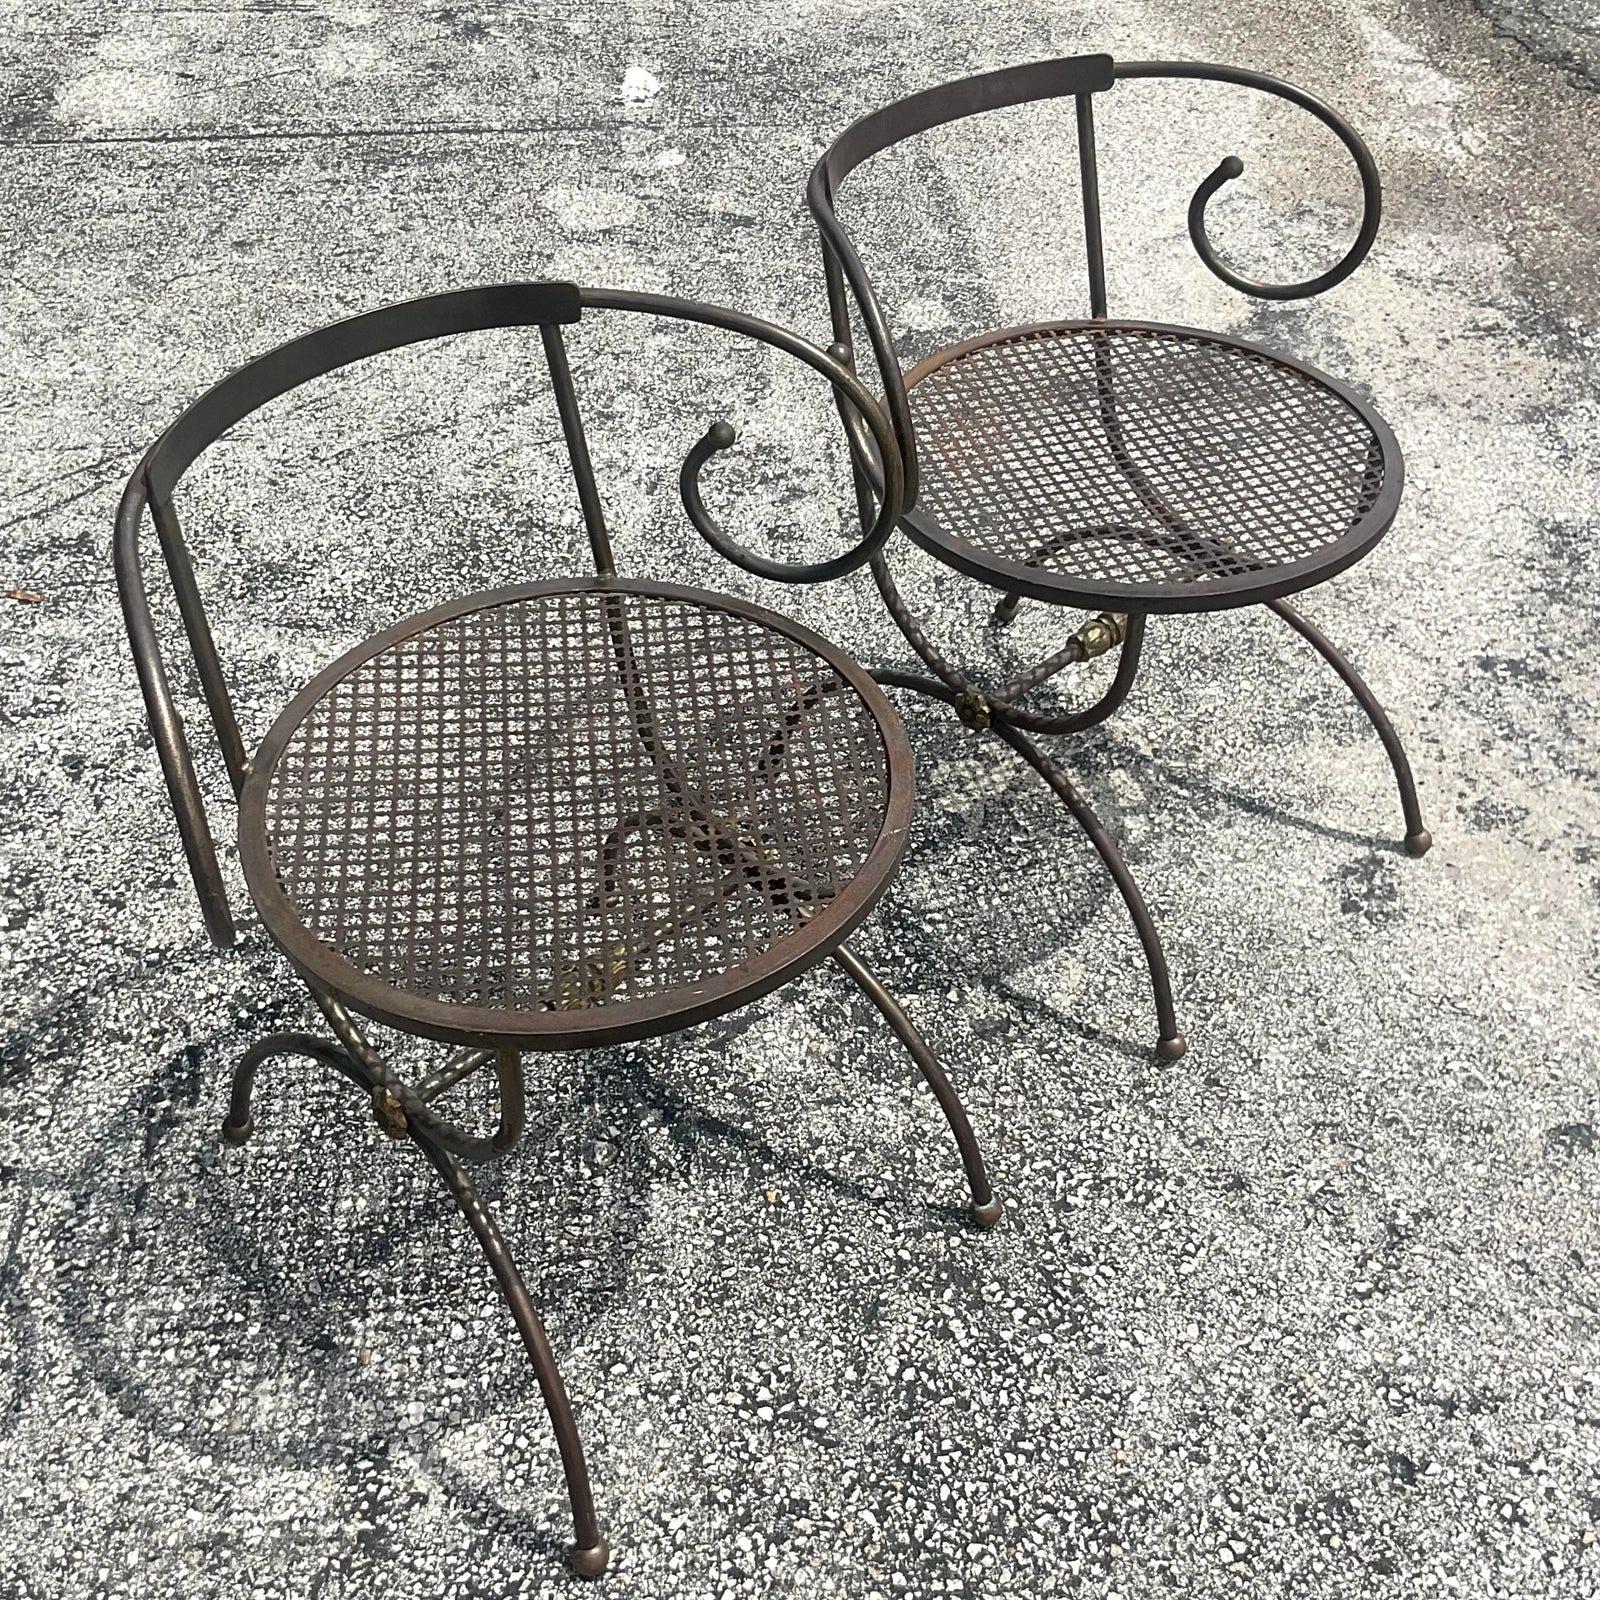 Vintage Boho Swirl Wrought Iron Accent Chairs - a Pair For Sale 3